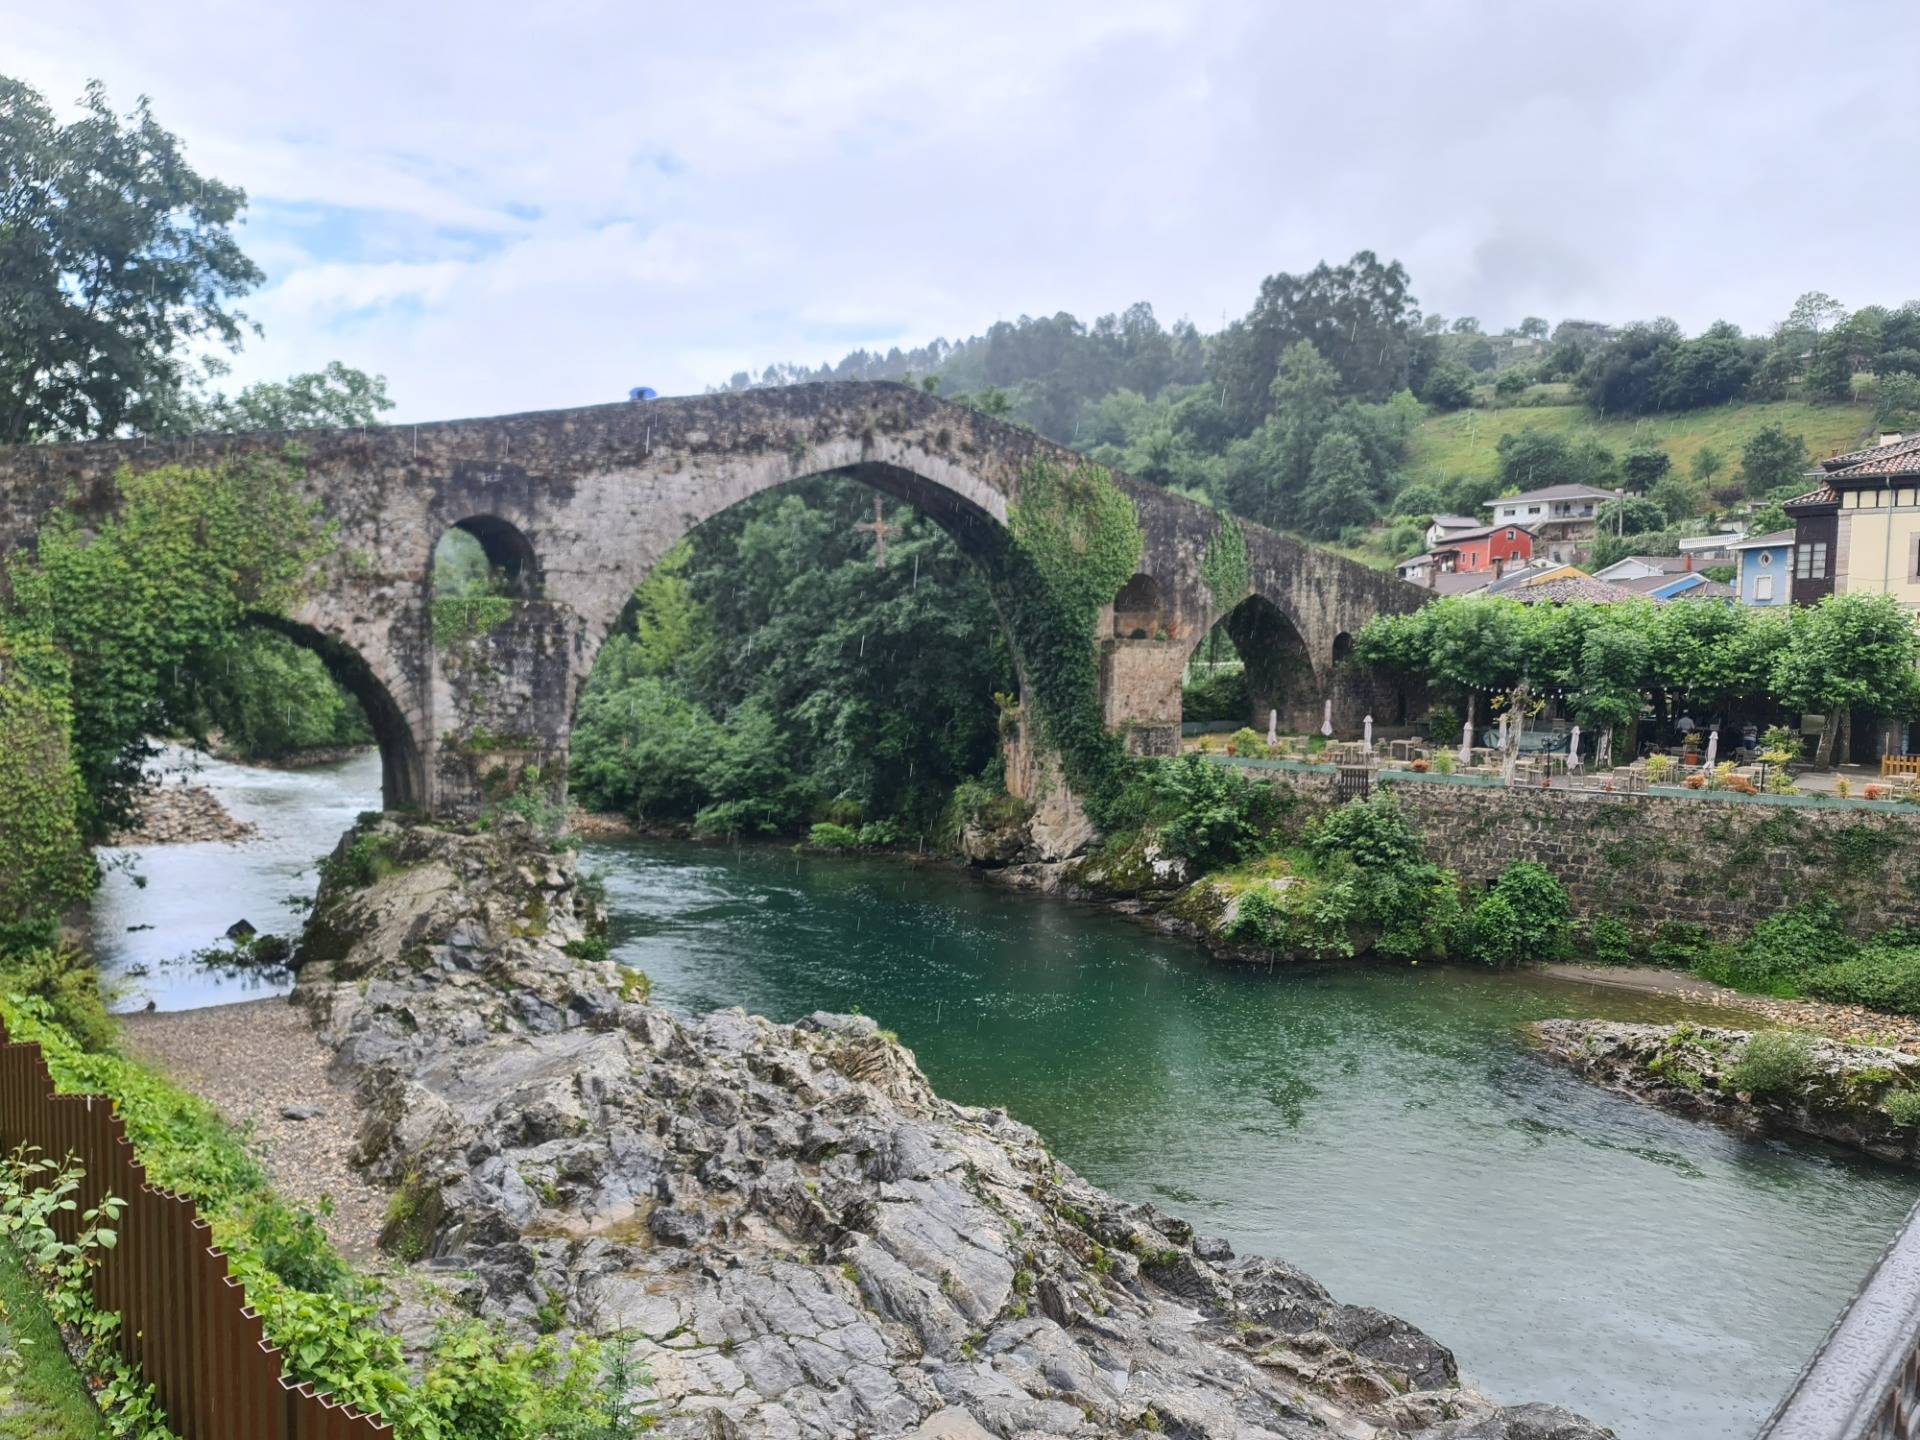 Roman Bridge (although its construction is of medieval origin and not Roman) and Victory Cross, over the Sella river (1).